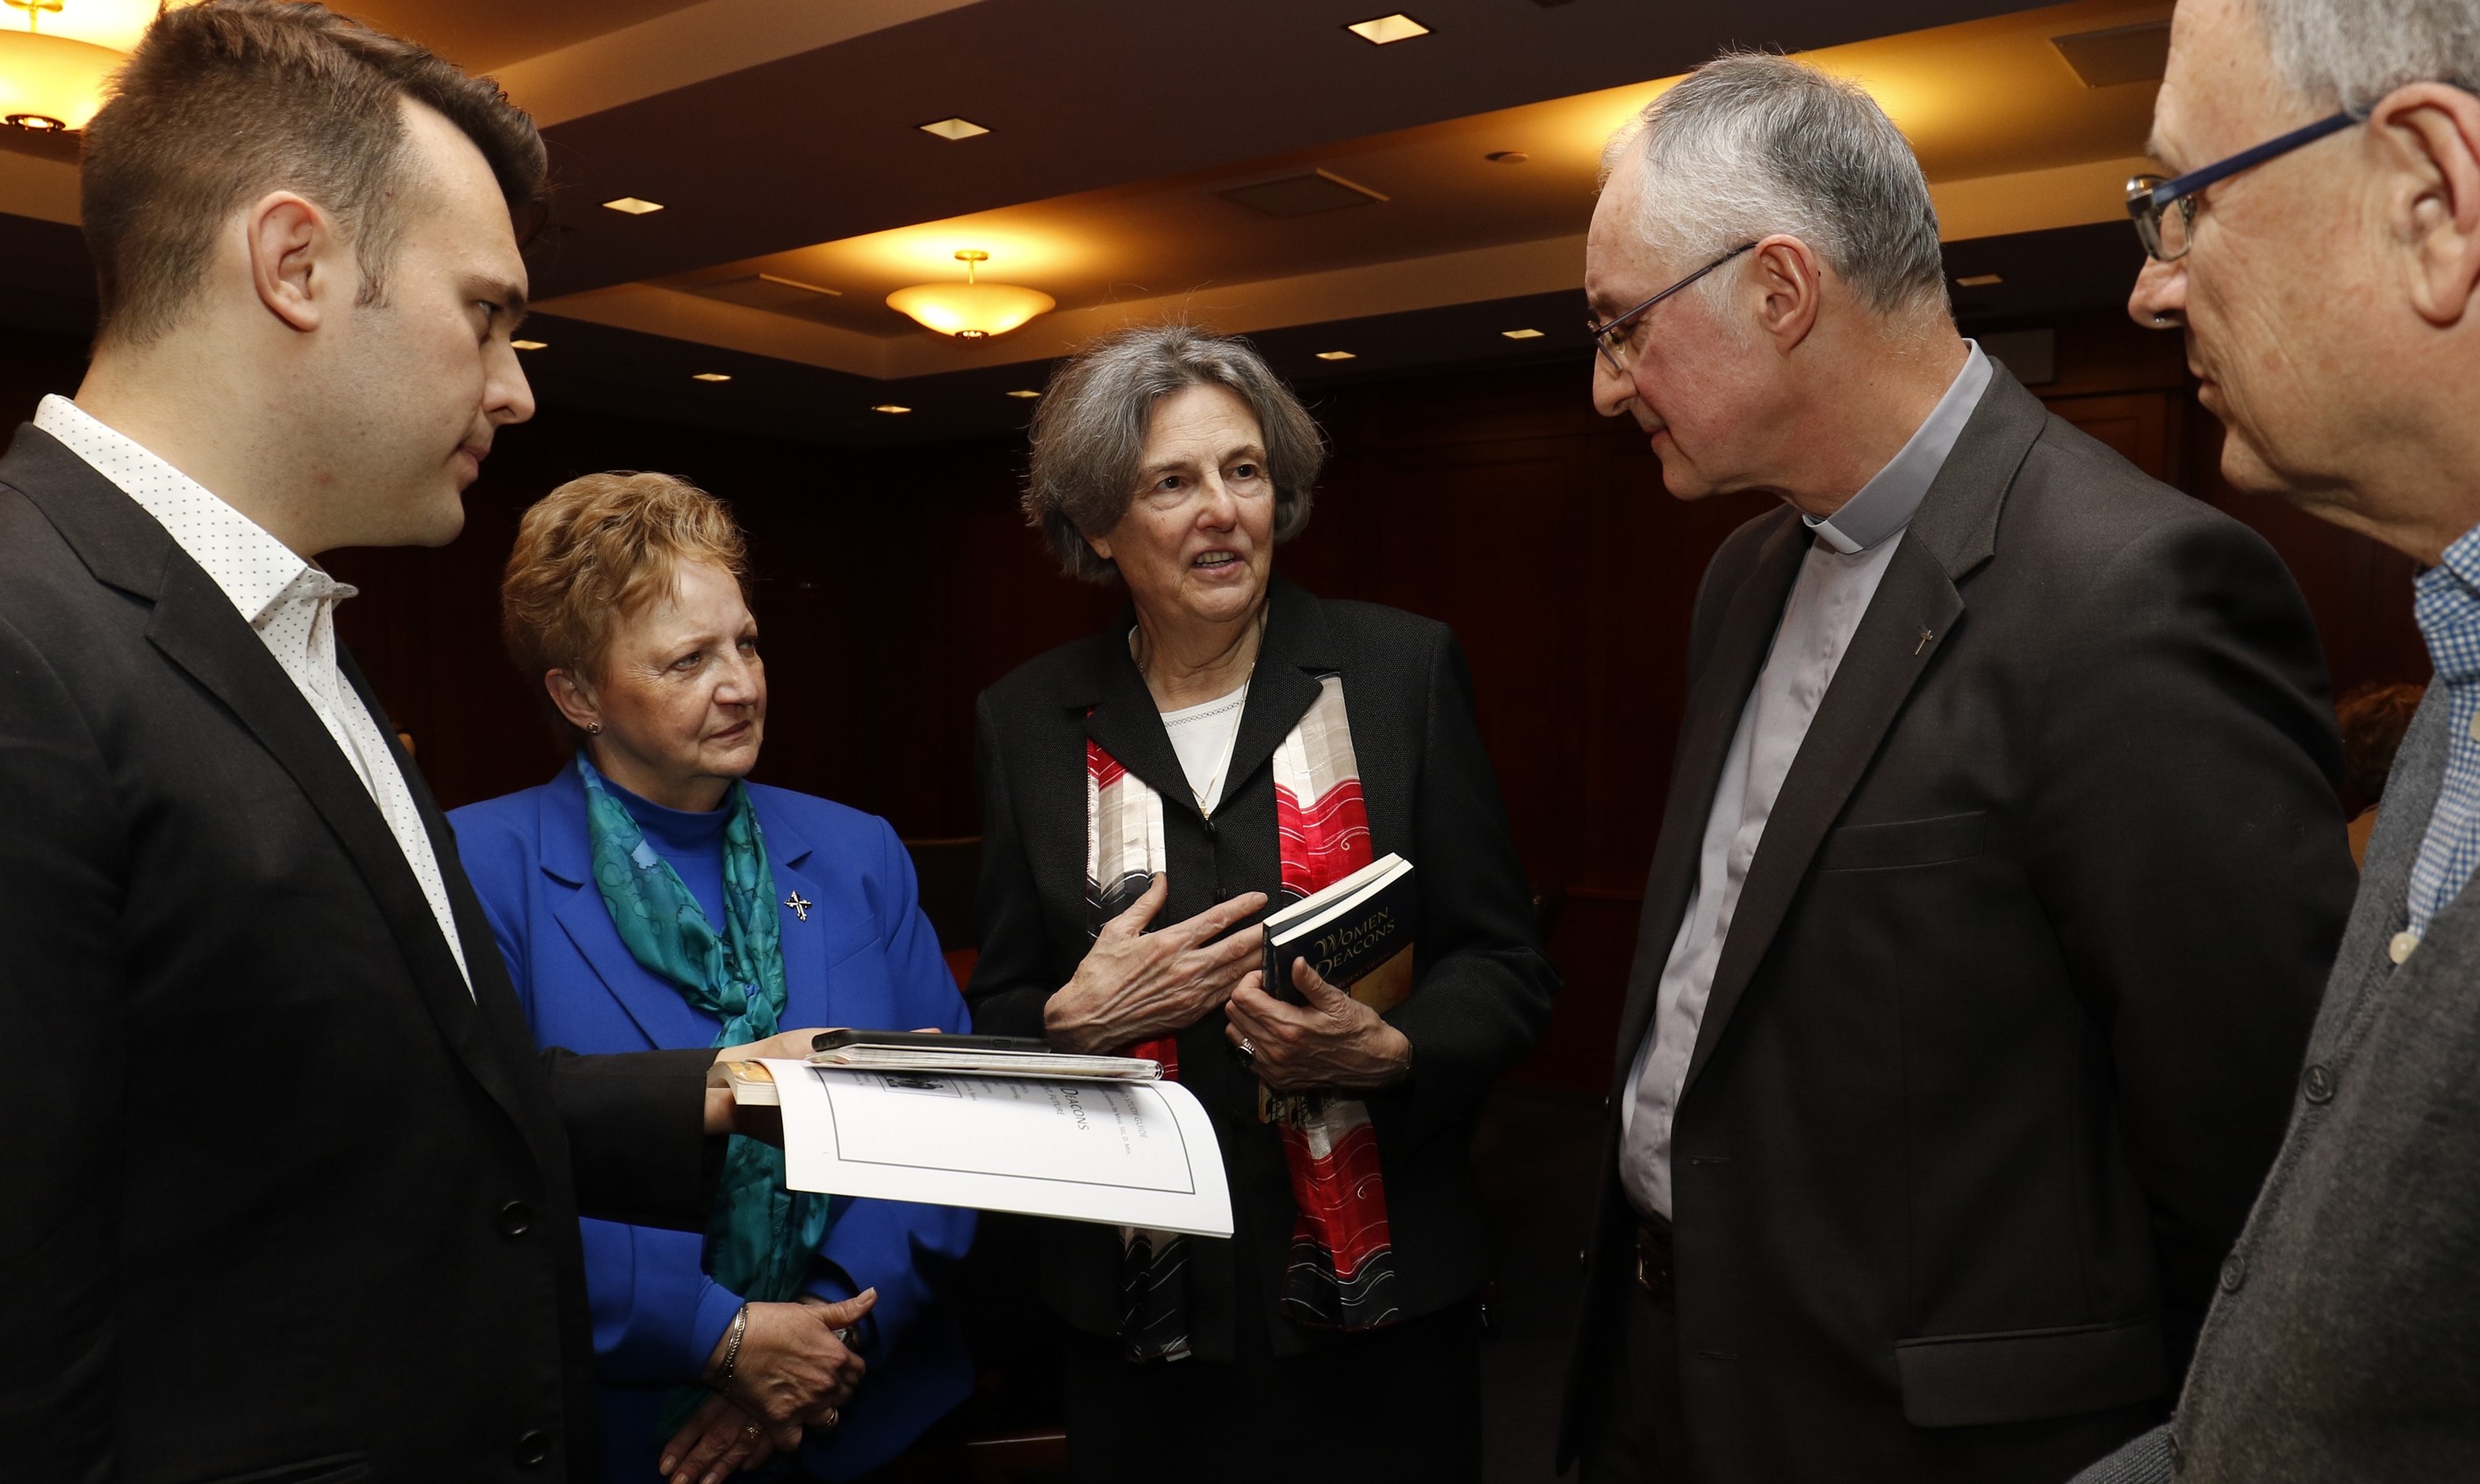 Catholic scholar and author Phyllis Zagano is flanked by Dominican Sr. Donna Ciangio and Jesuit Fr. Bernard Pottier as she speaks with journalists prior to a Jan. 15, 2019, symposium on the history and future of women deacons in the Catholic Church. (CNS/Gregory A. Shemitz) 